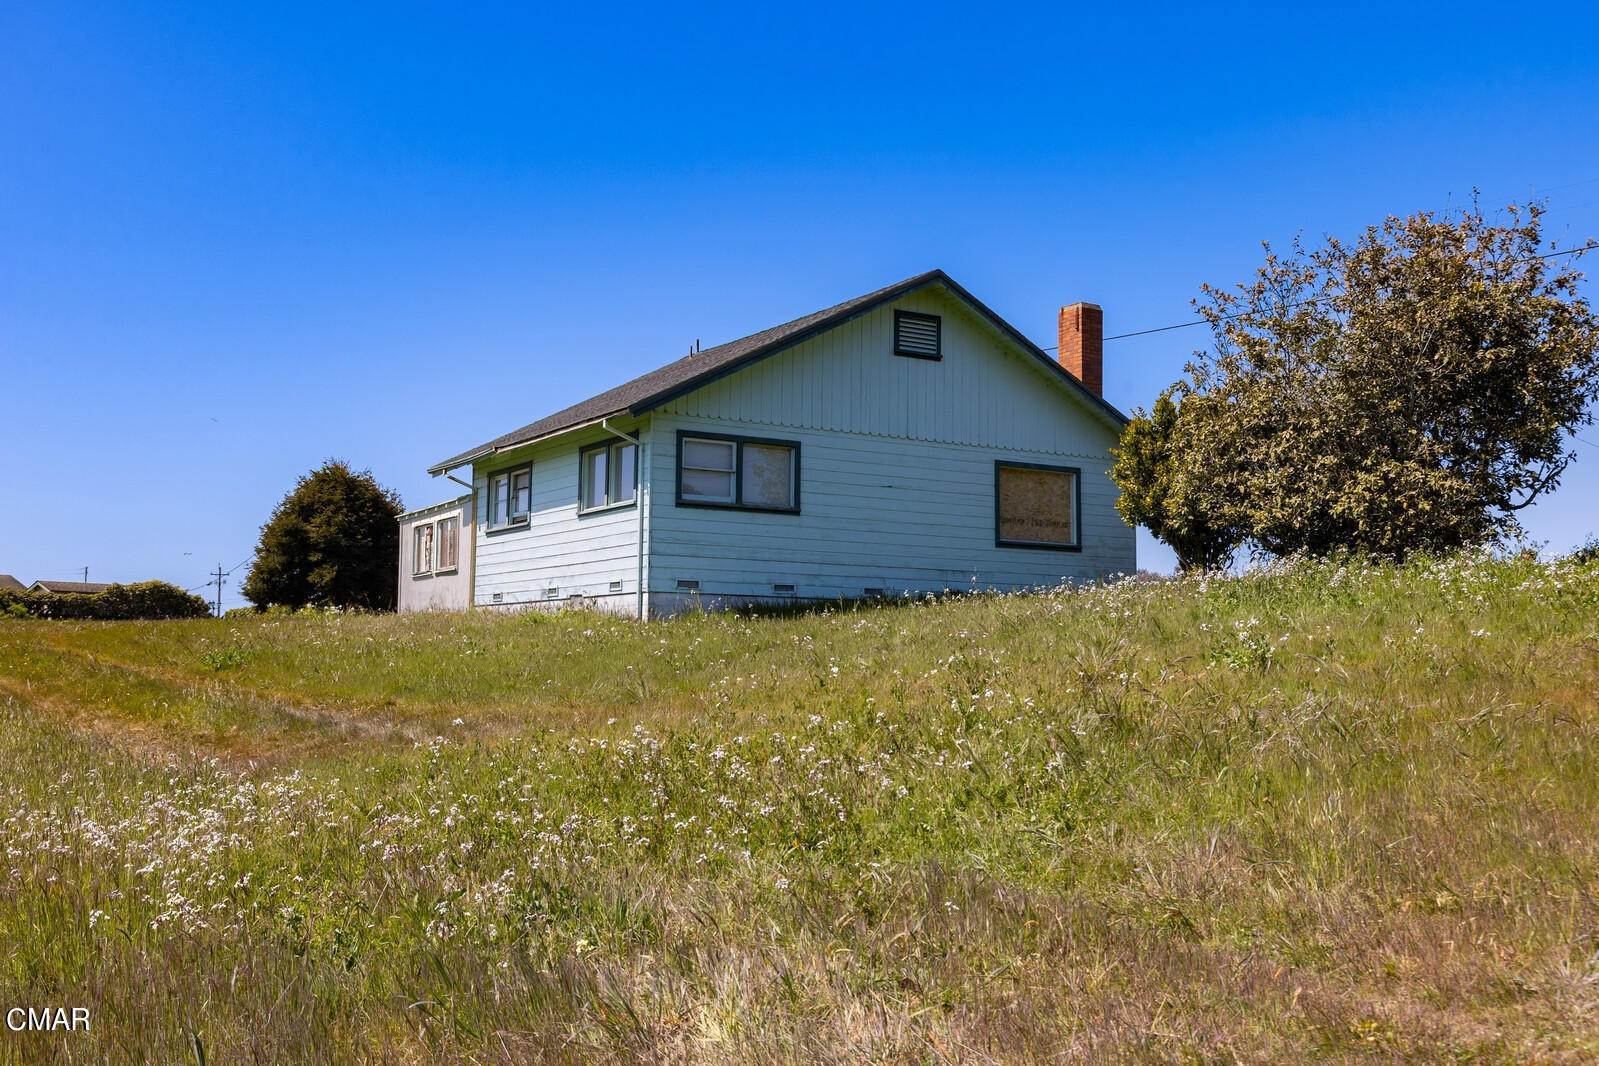 6. Acreage for Sale at 440 South Street Fort Bragg, California 95437 United States